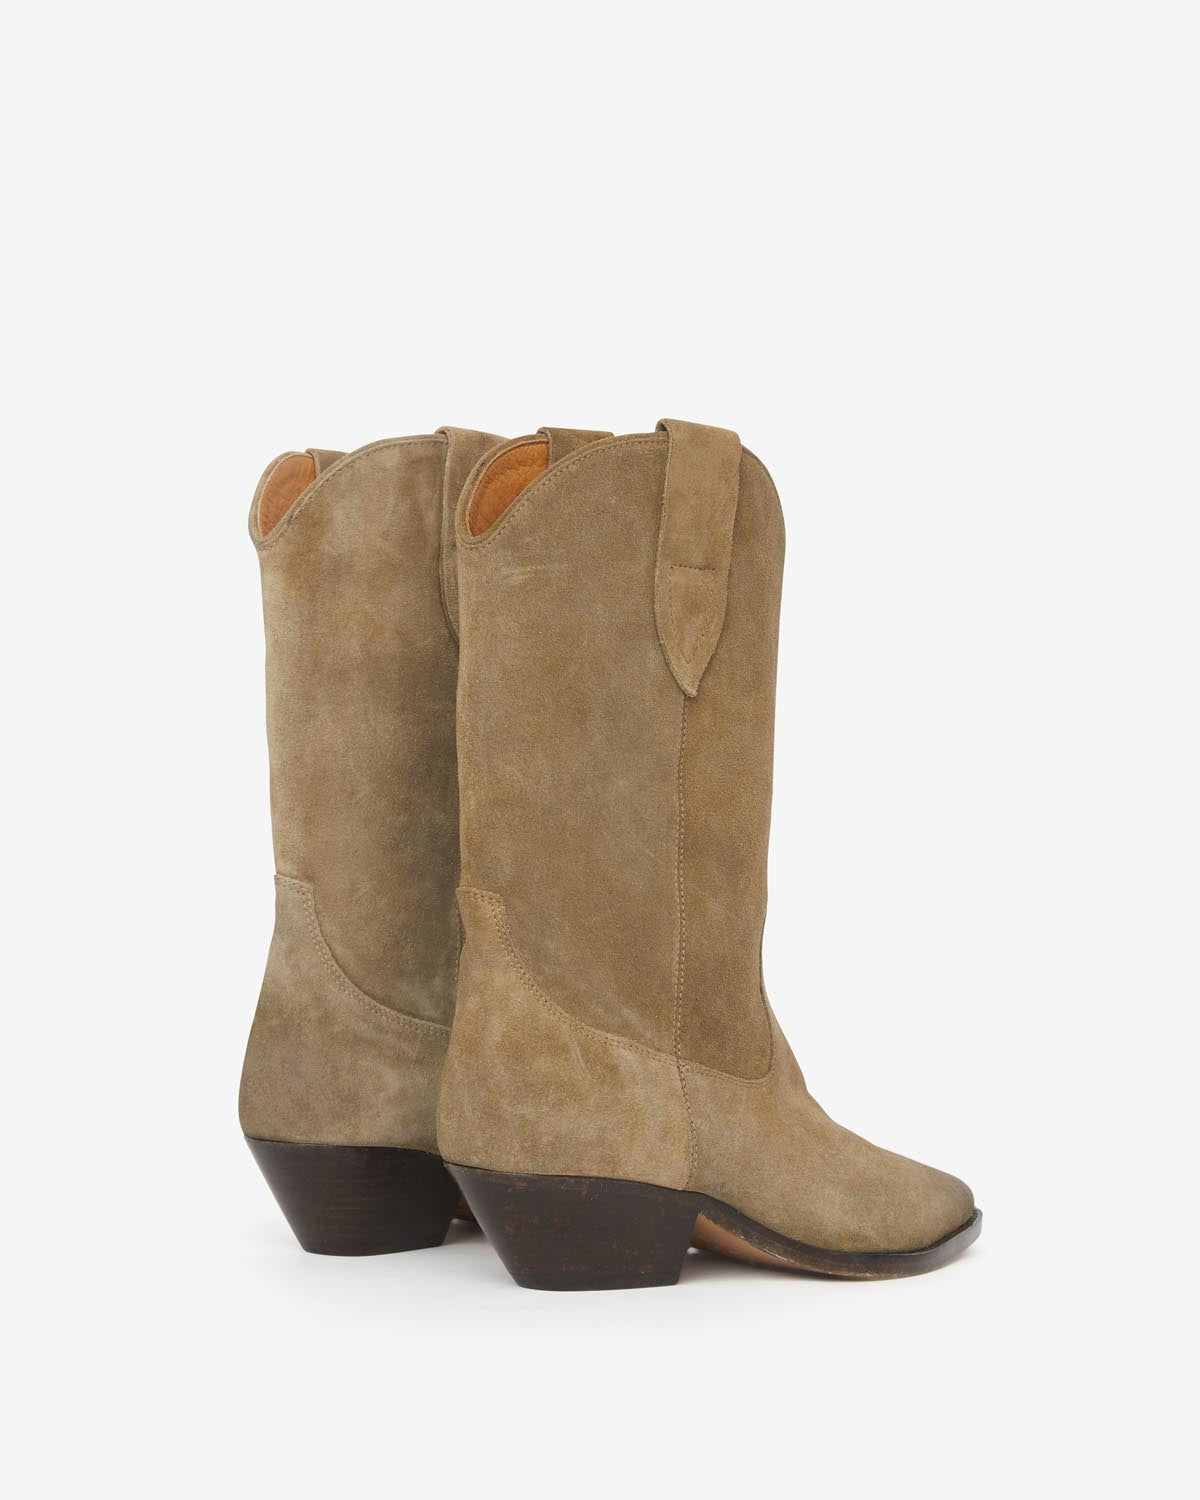 Stiefel duerto Woman Taupe 4